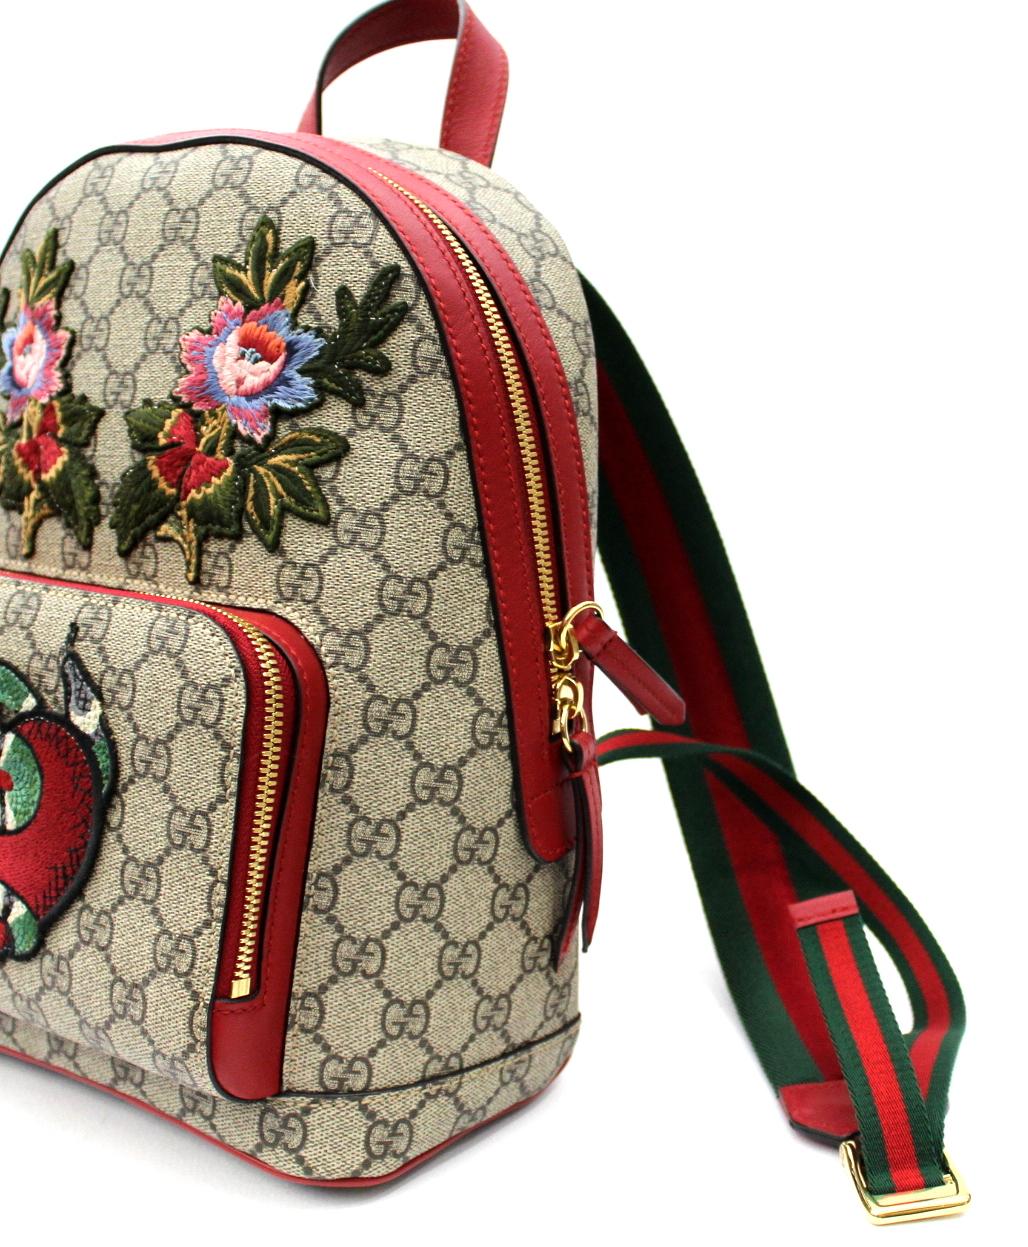 limited edition gucci backpack